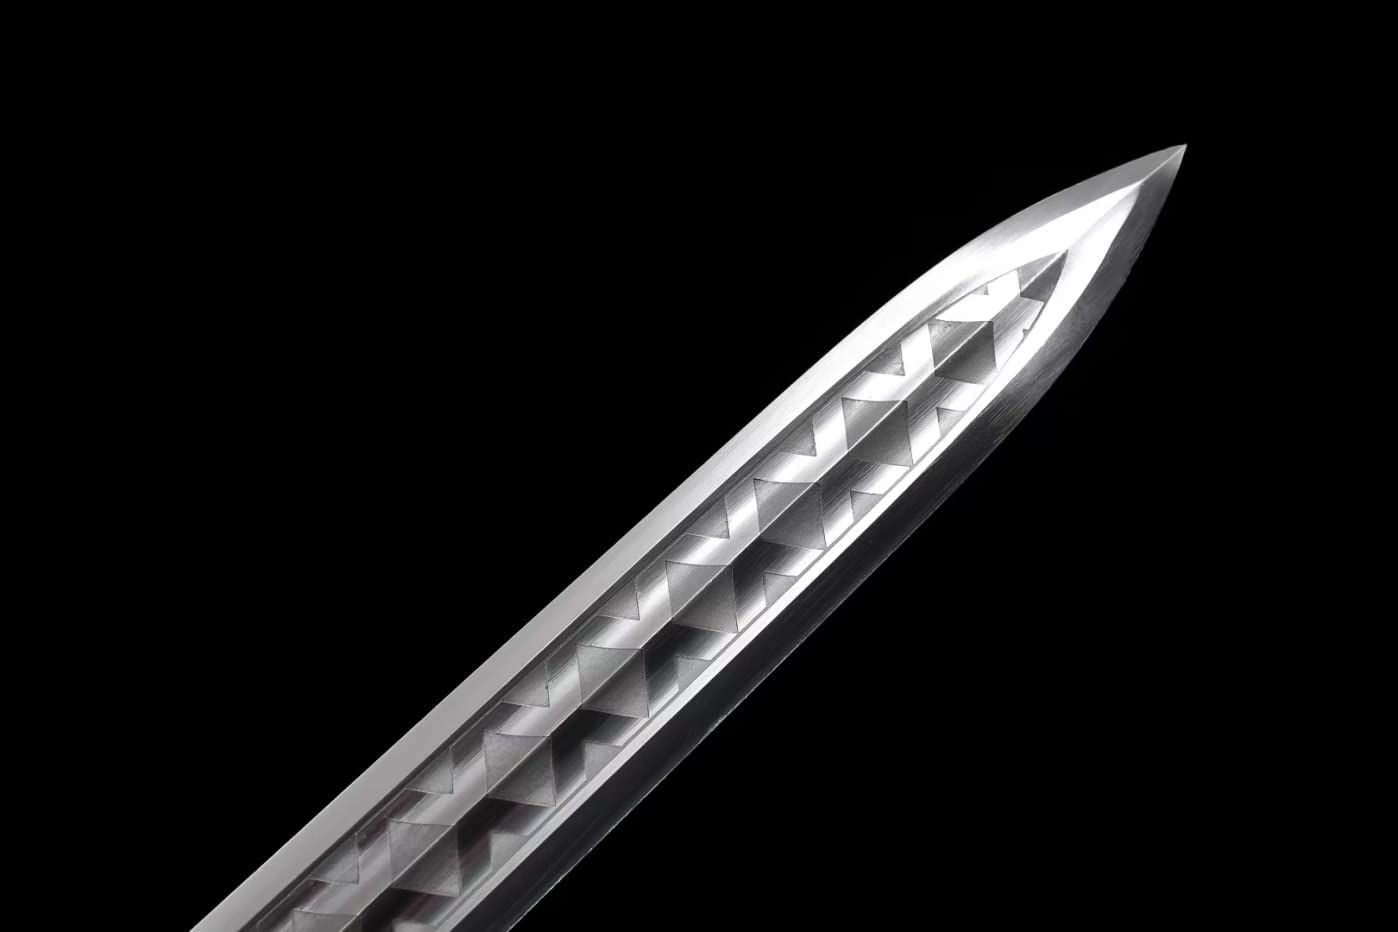 Ruyi jian,High Carbon Steel Etch Blade,Alloy Fittings,Black Wood Scabbard,Chinese sword